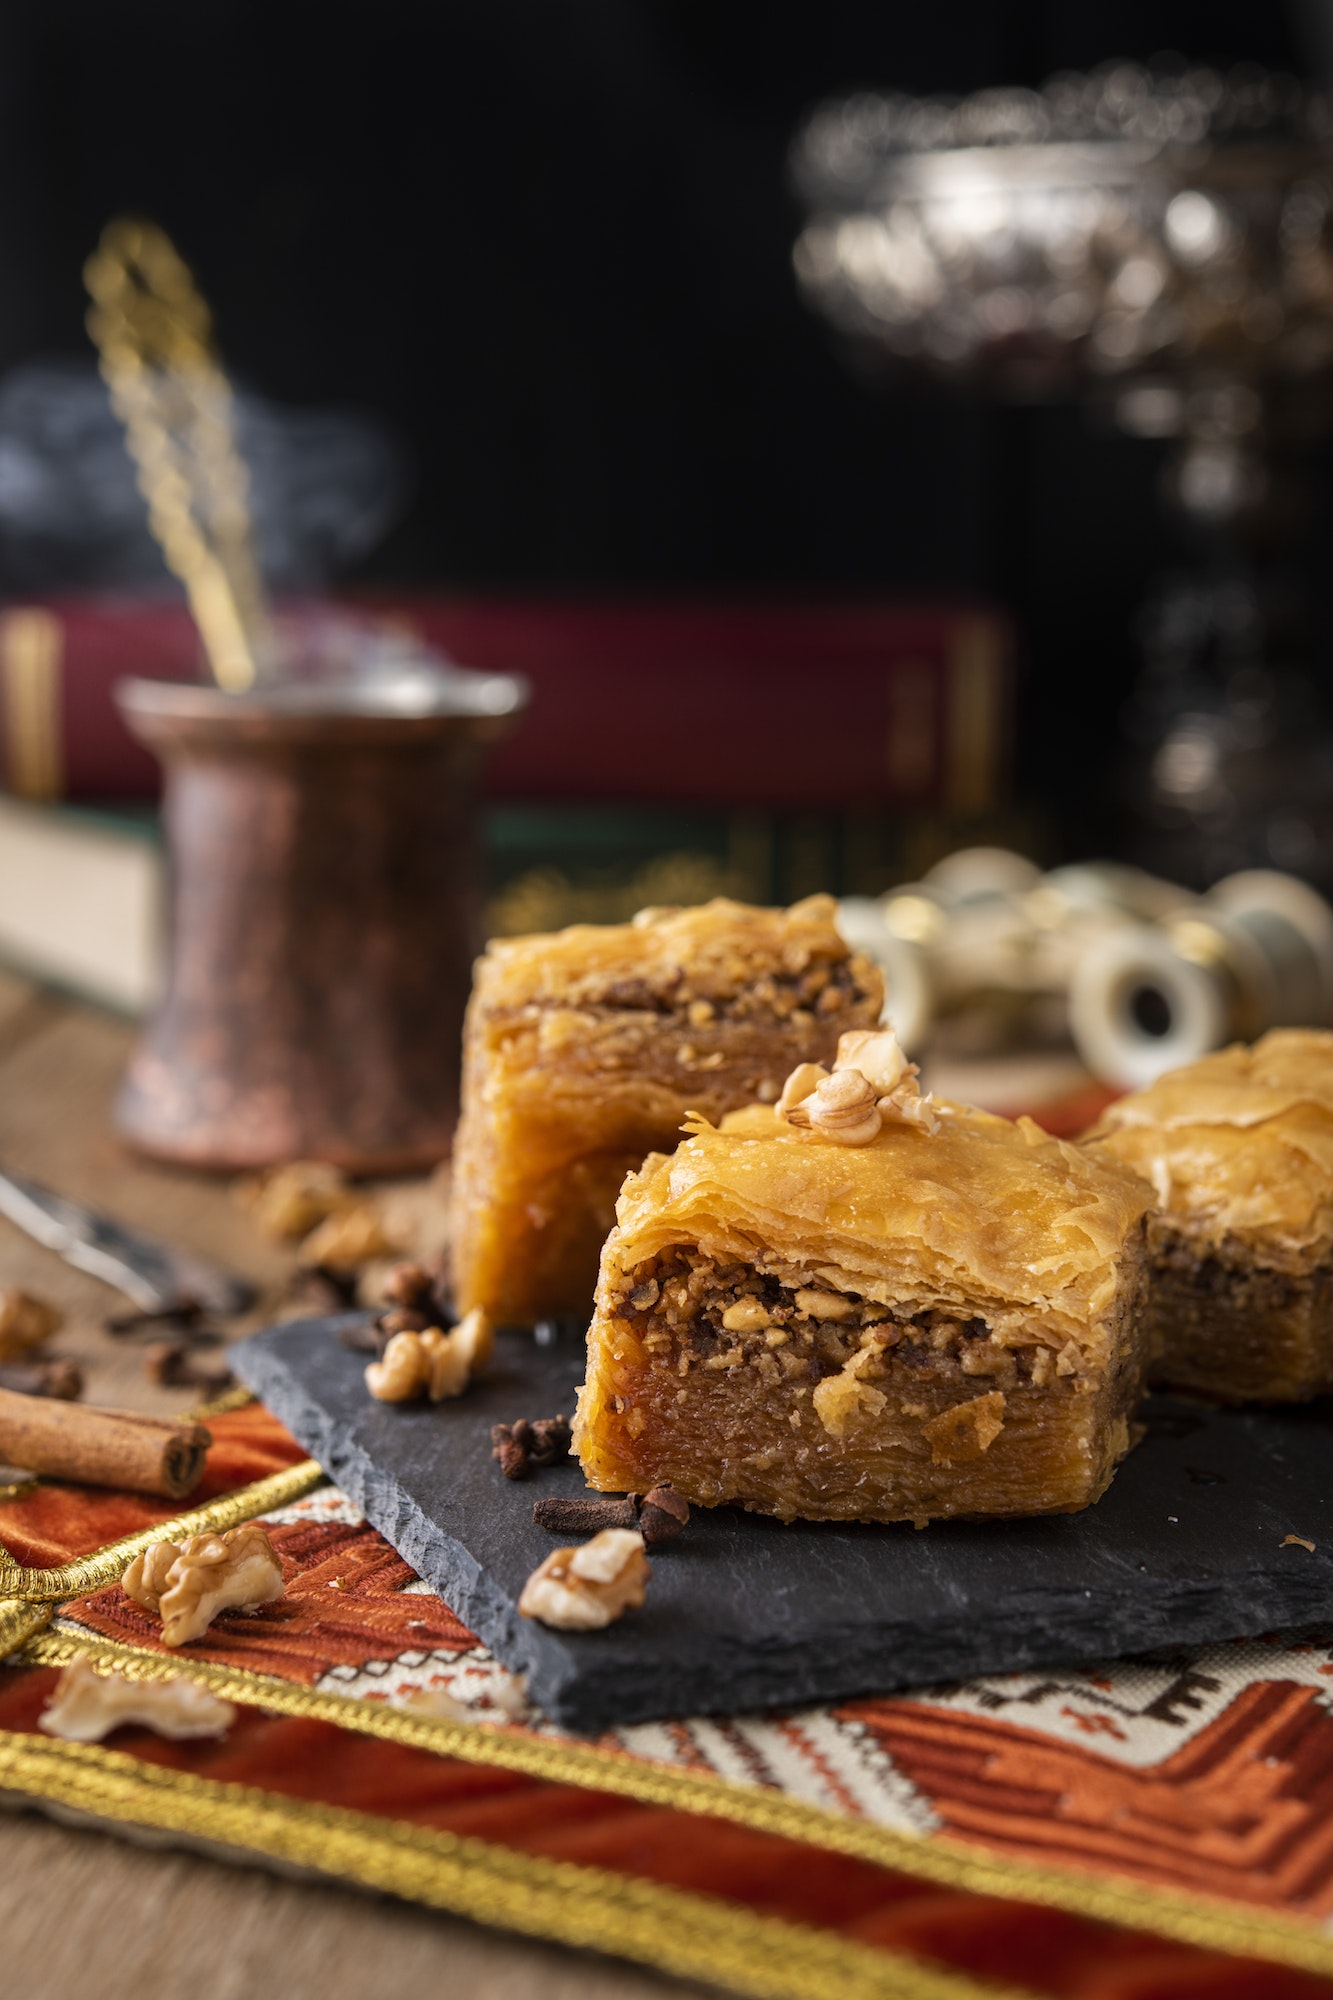 Baklava sweets with nuts on it with coffee and cinnamon